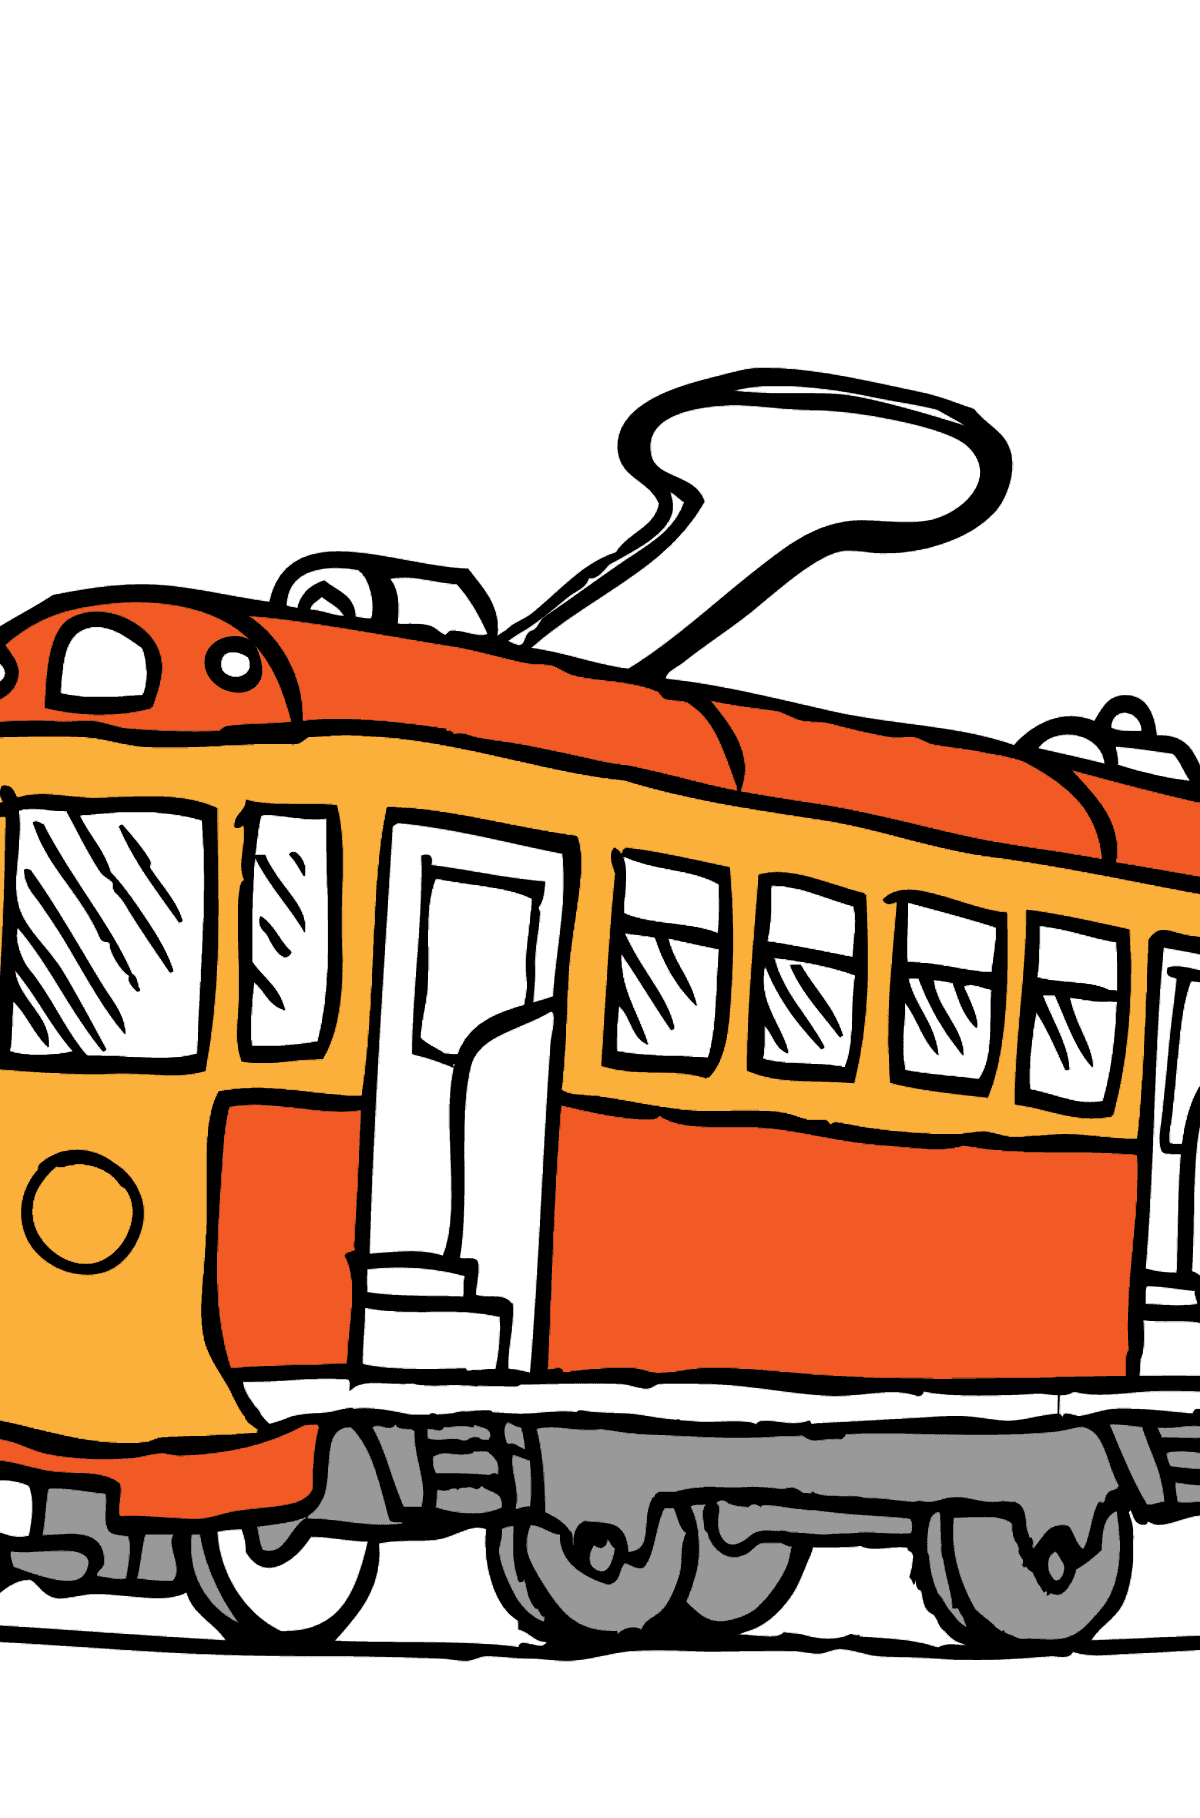 Simple Coloring Page - A Tram is Bored - Coloring Pages for Kids